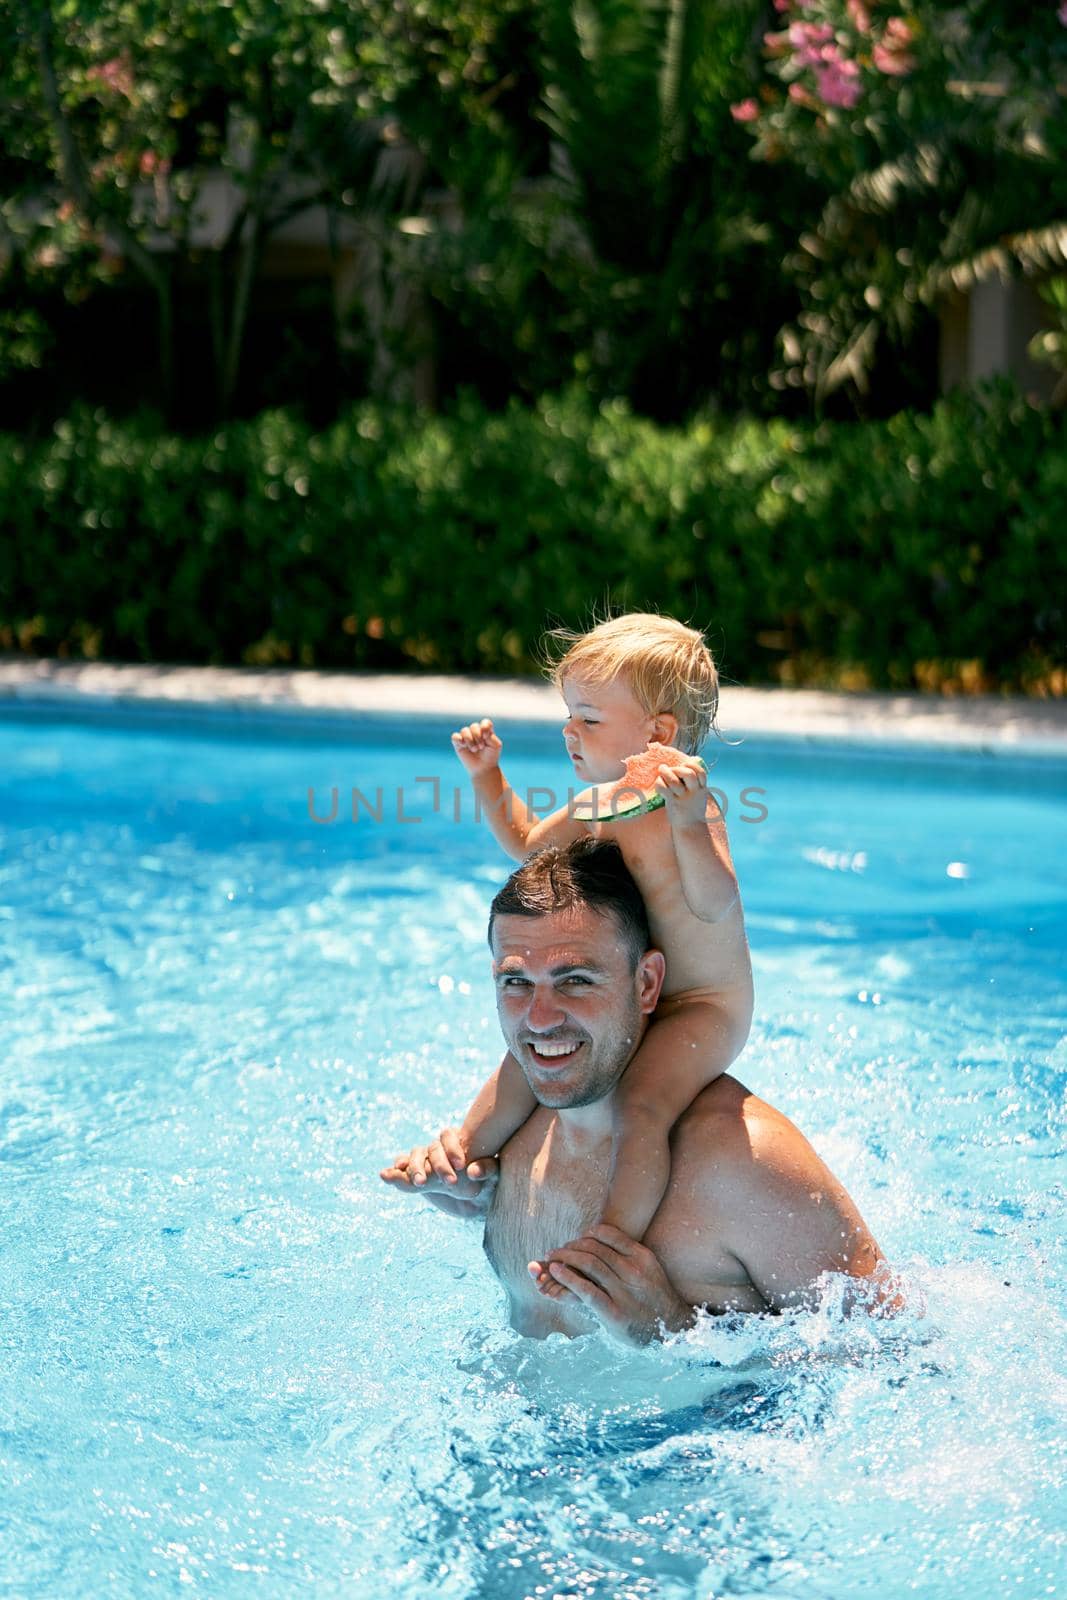 Little girl with a watermelon in her hand sits on the shoulders of her dad in the pool by Nadtochiy